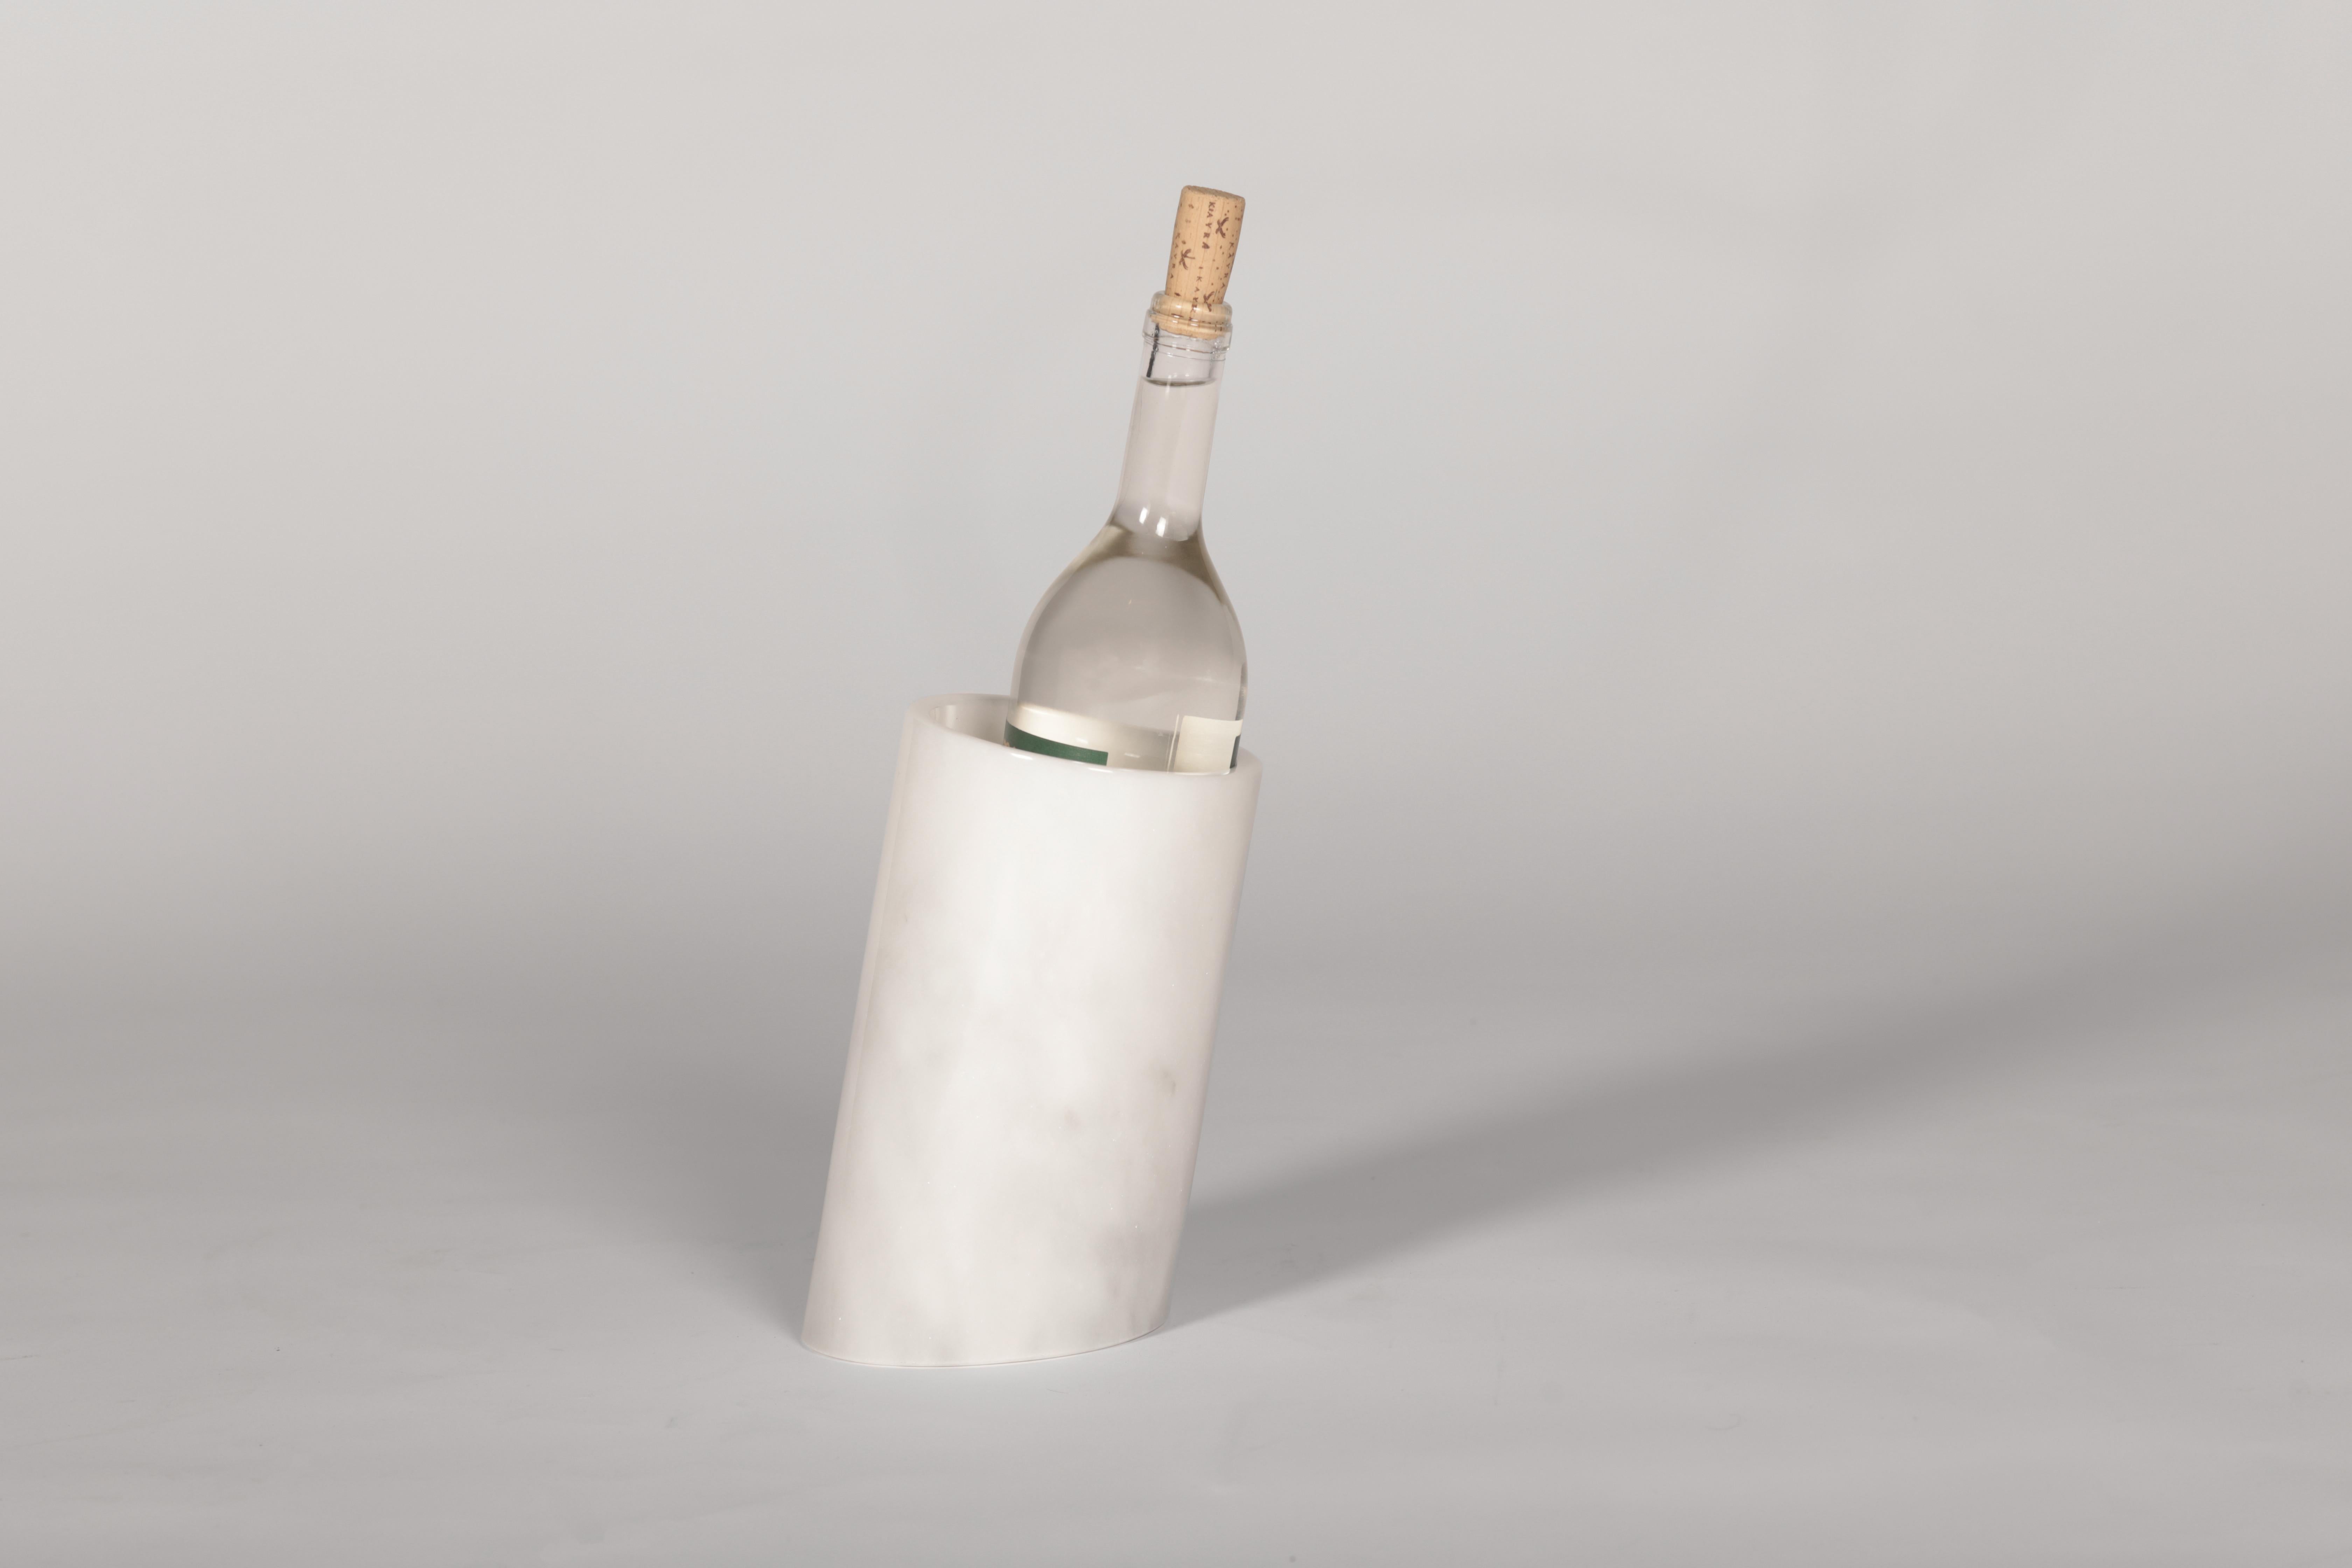 Elegant and useful Botella is designed to keep your liquor bottles chilled with the coldness of marble and serve them in a stylish way.

Since marble is a natural material, the colors and veins may differ from the purchased product as seen in the